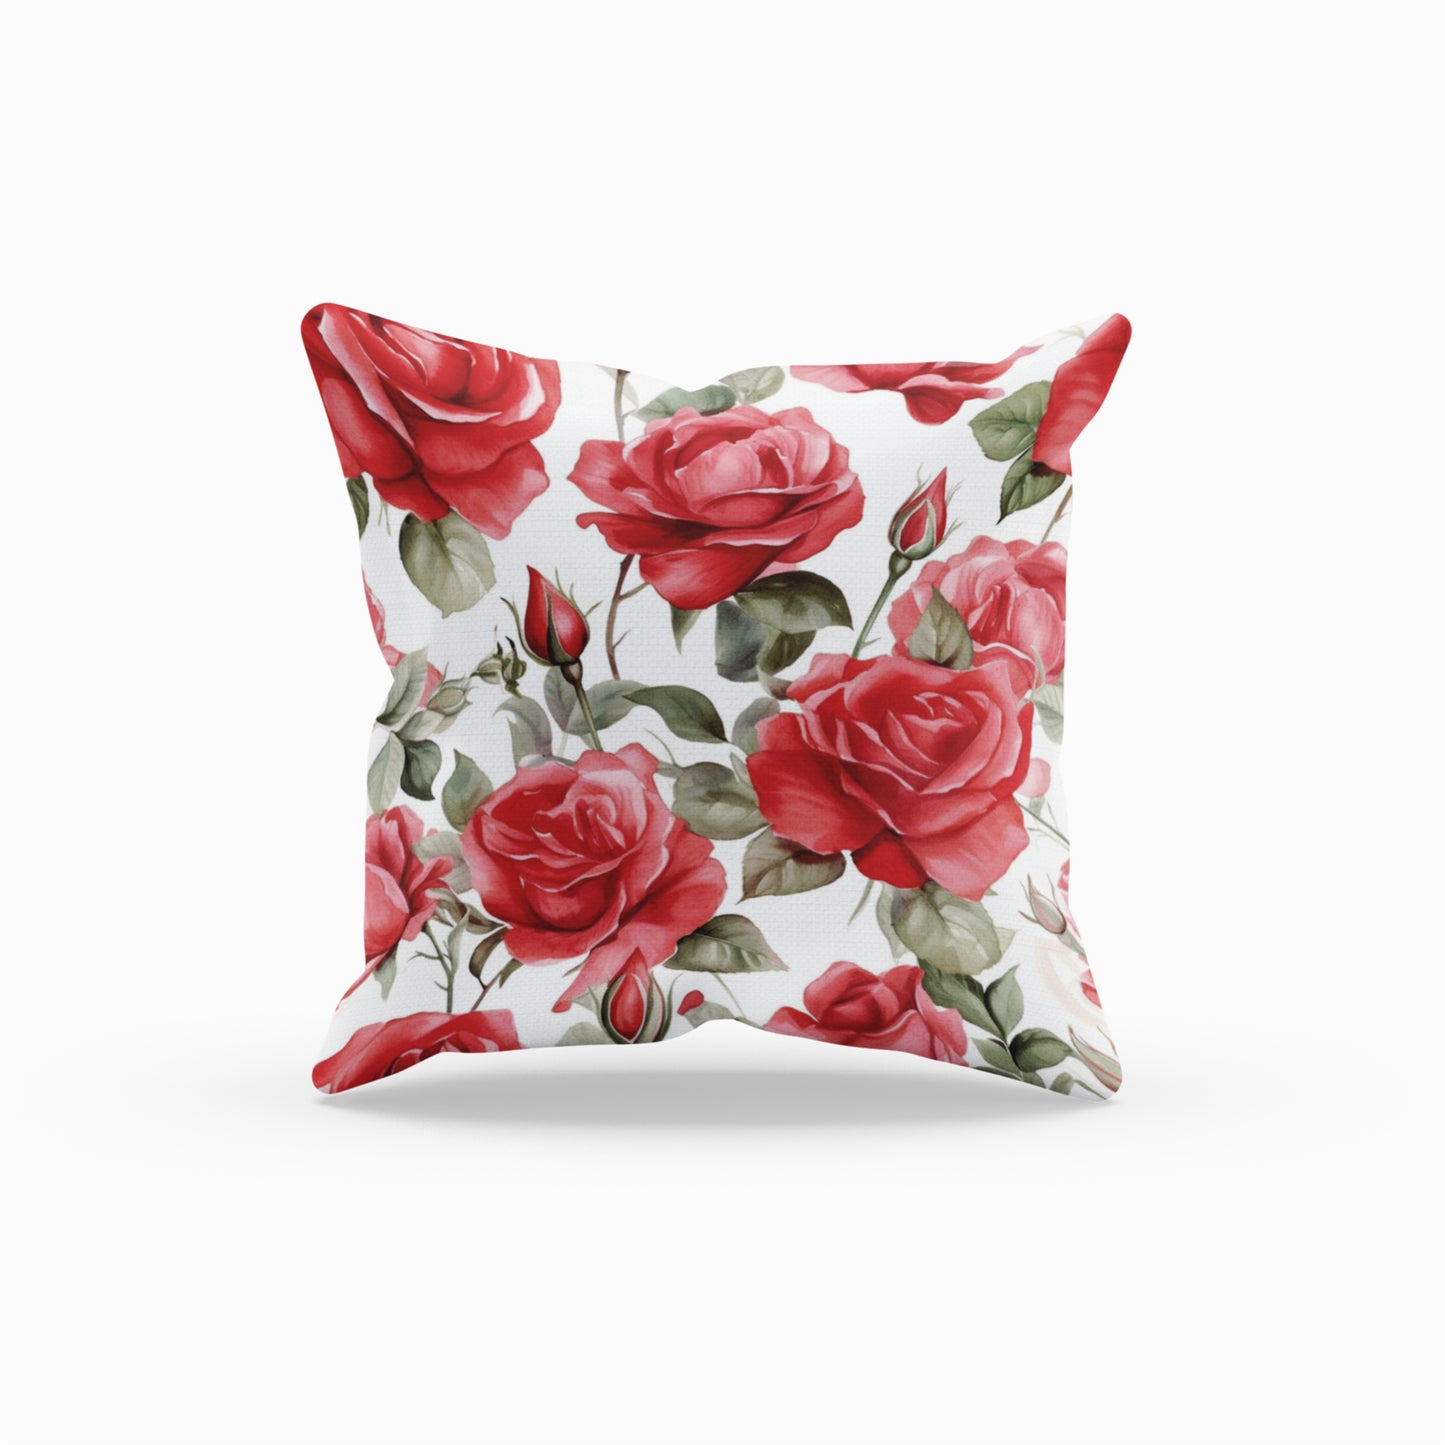 Stylish Printed Throw Pillow with Red Rose Design